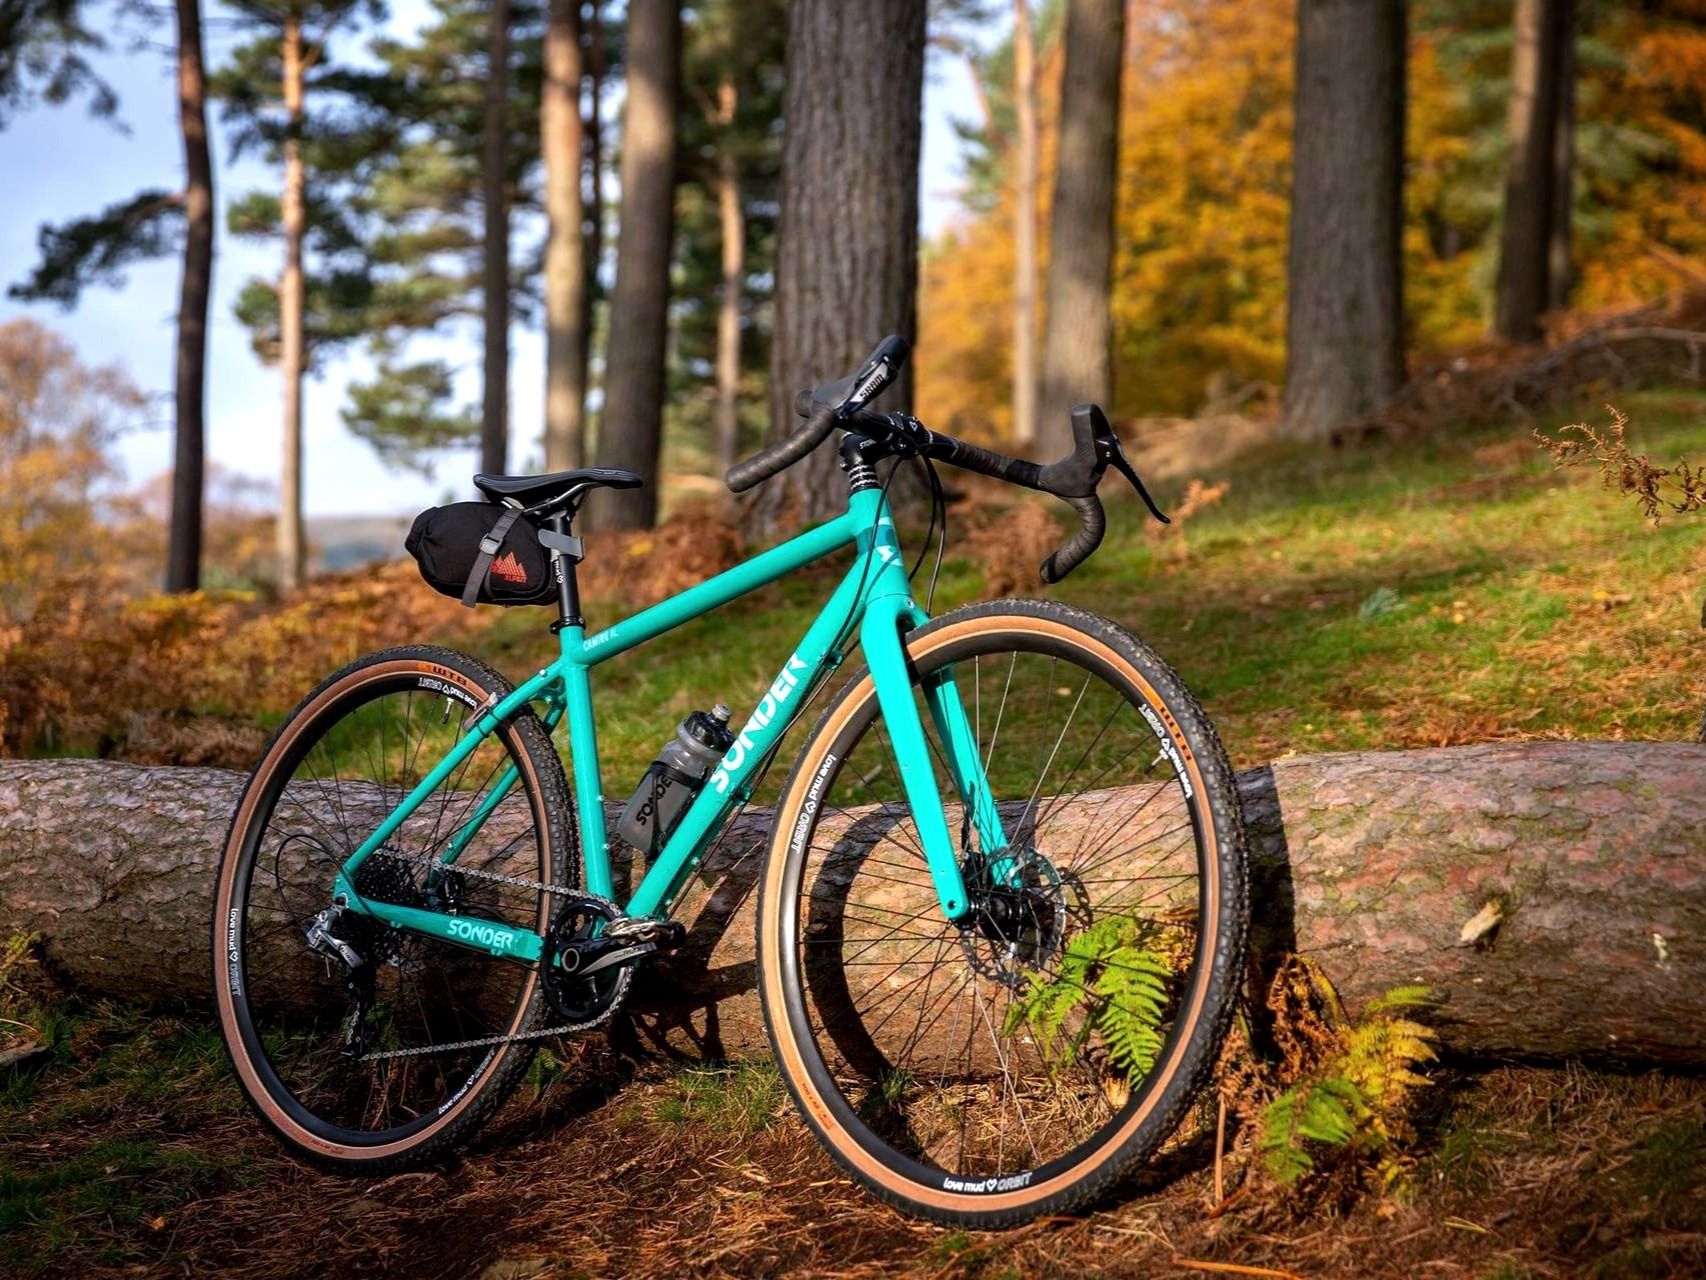 A purpose-built Sonder gravel bike, with a rigid frame, ready to explore the forest. Photo: Wild Cycles